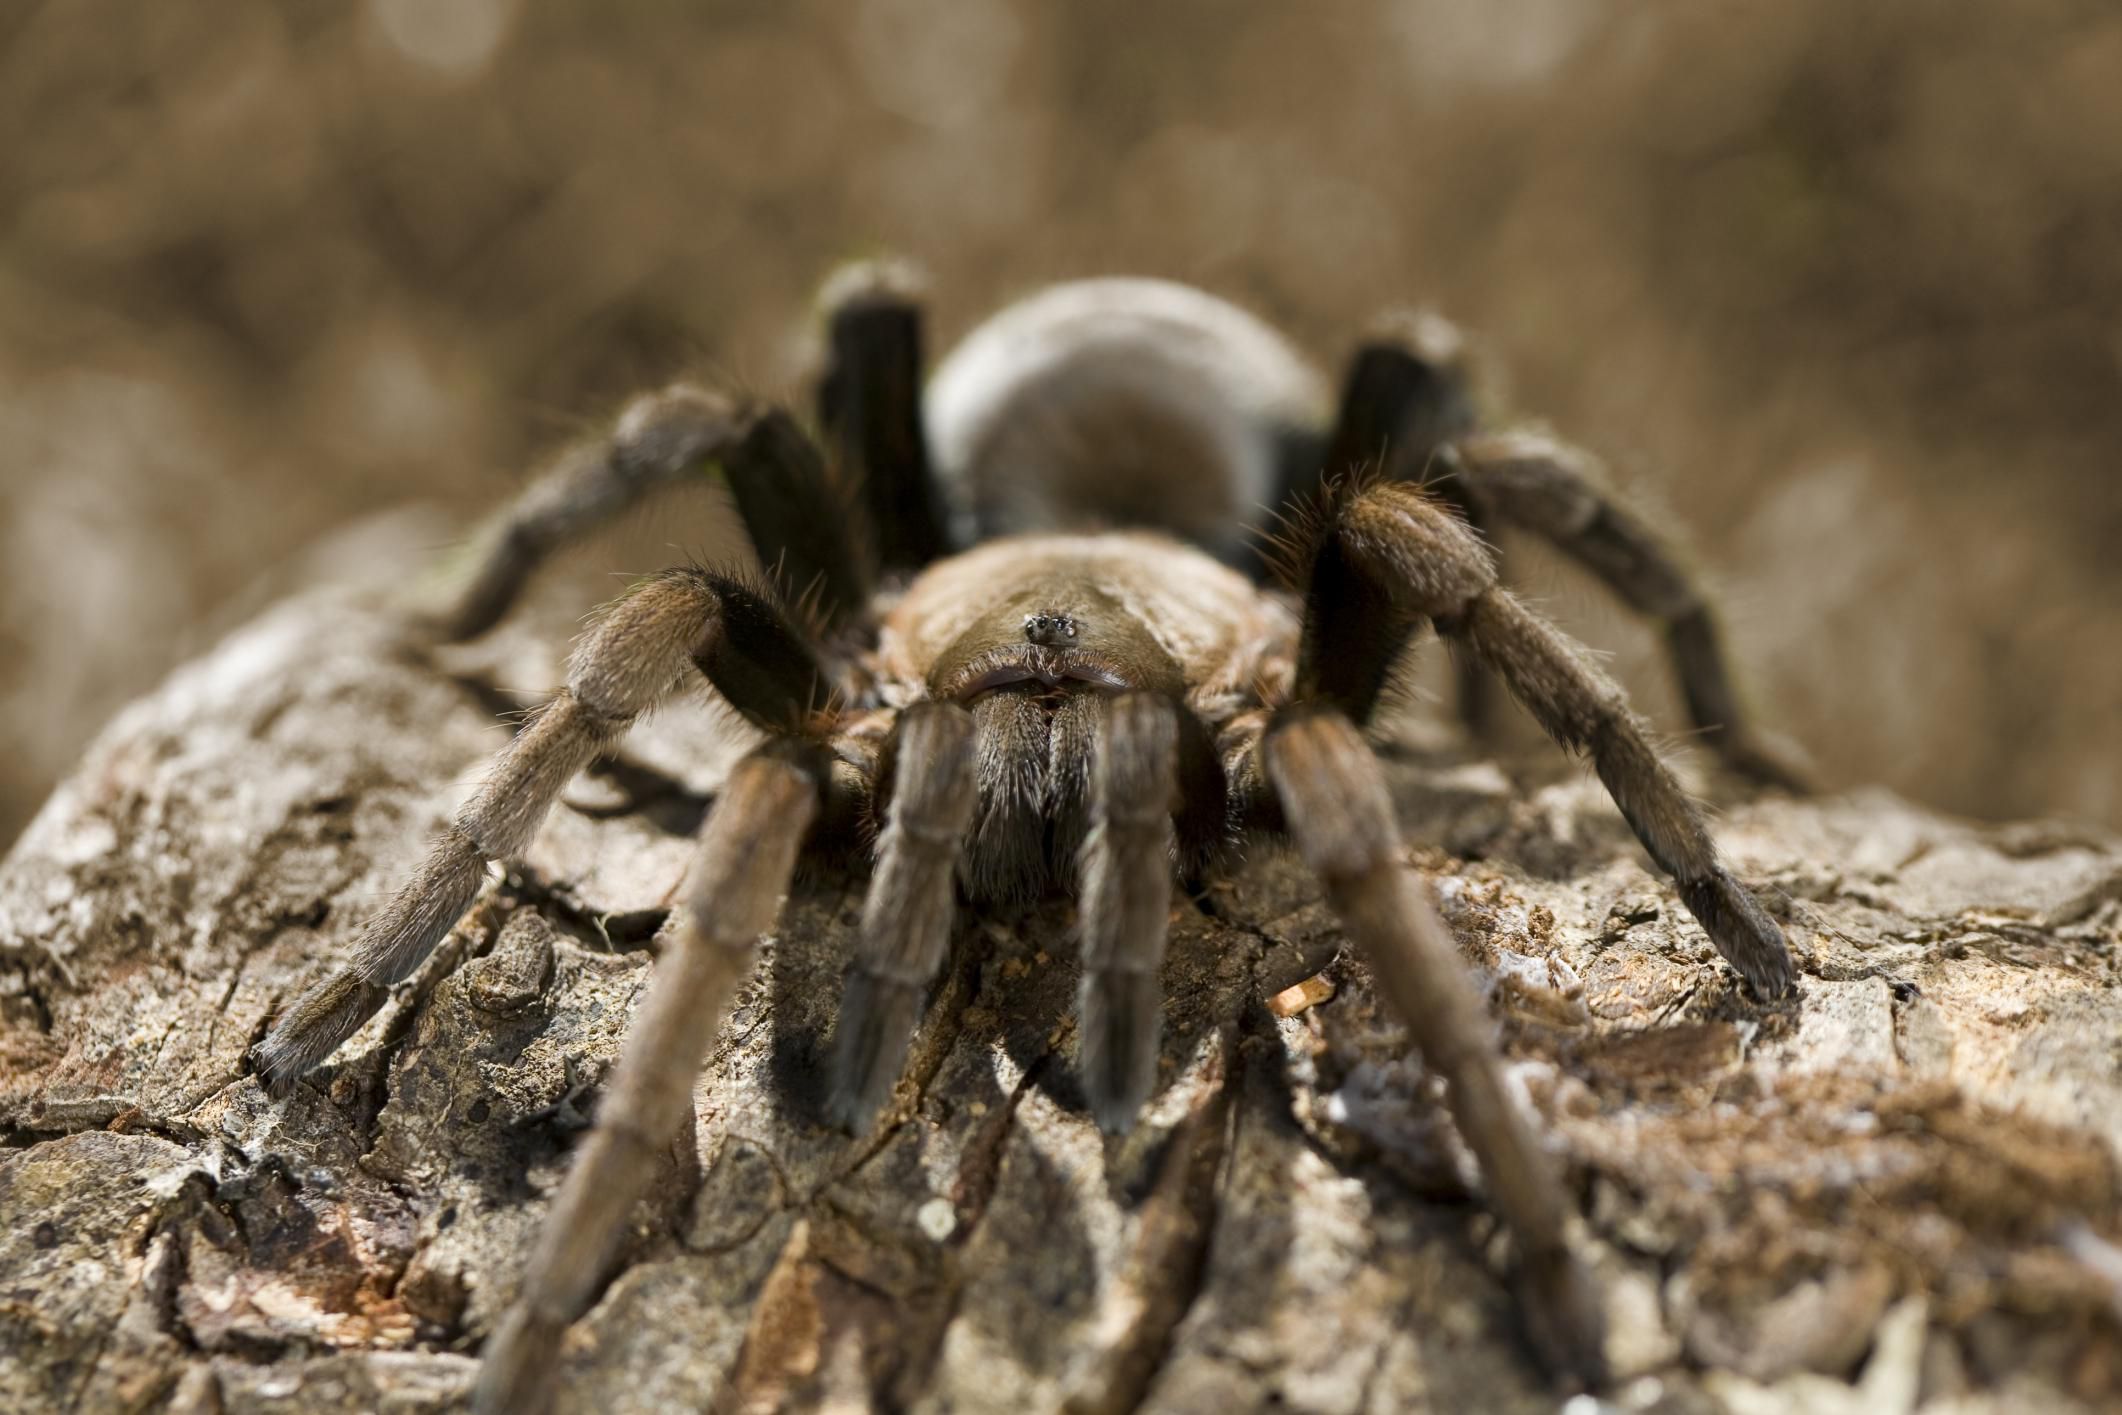 The Tarantula: A Docile, Not Deadly, Spider